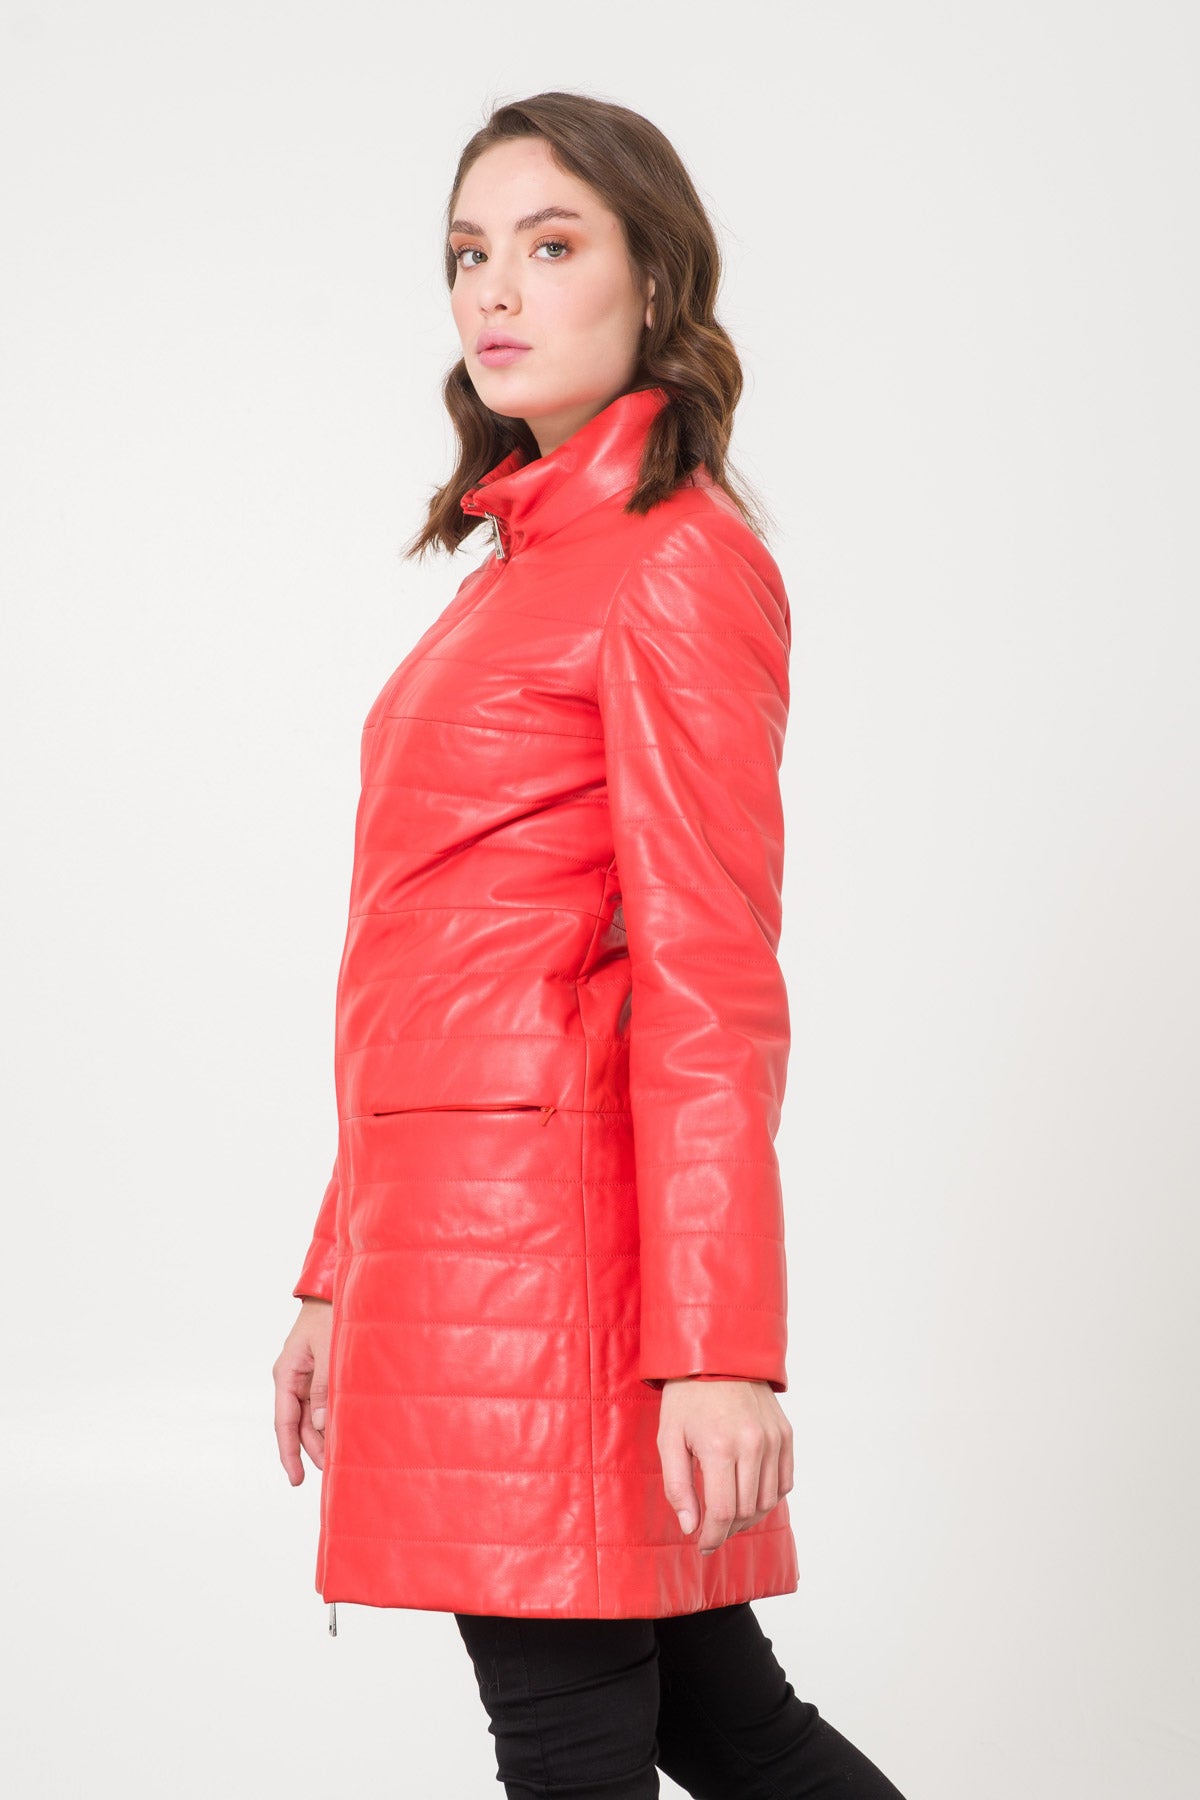 Coral Color Leather Coat